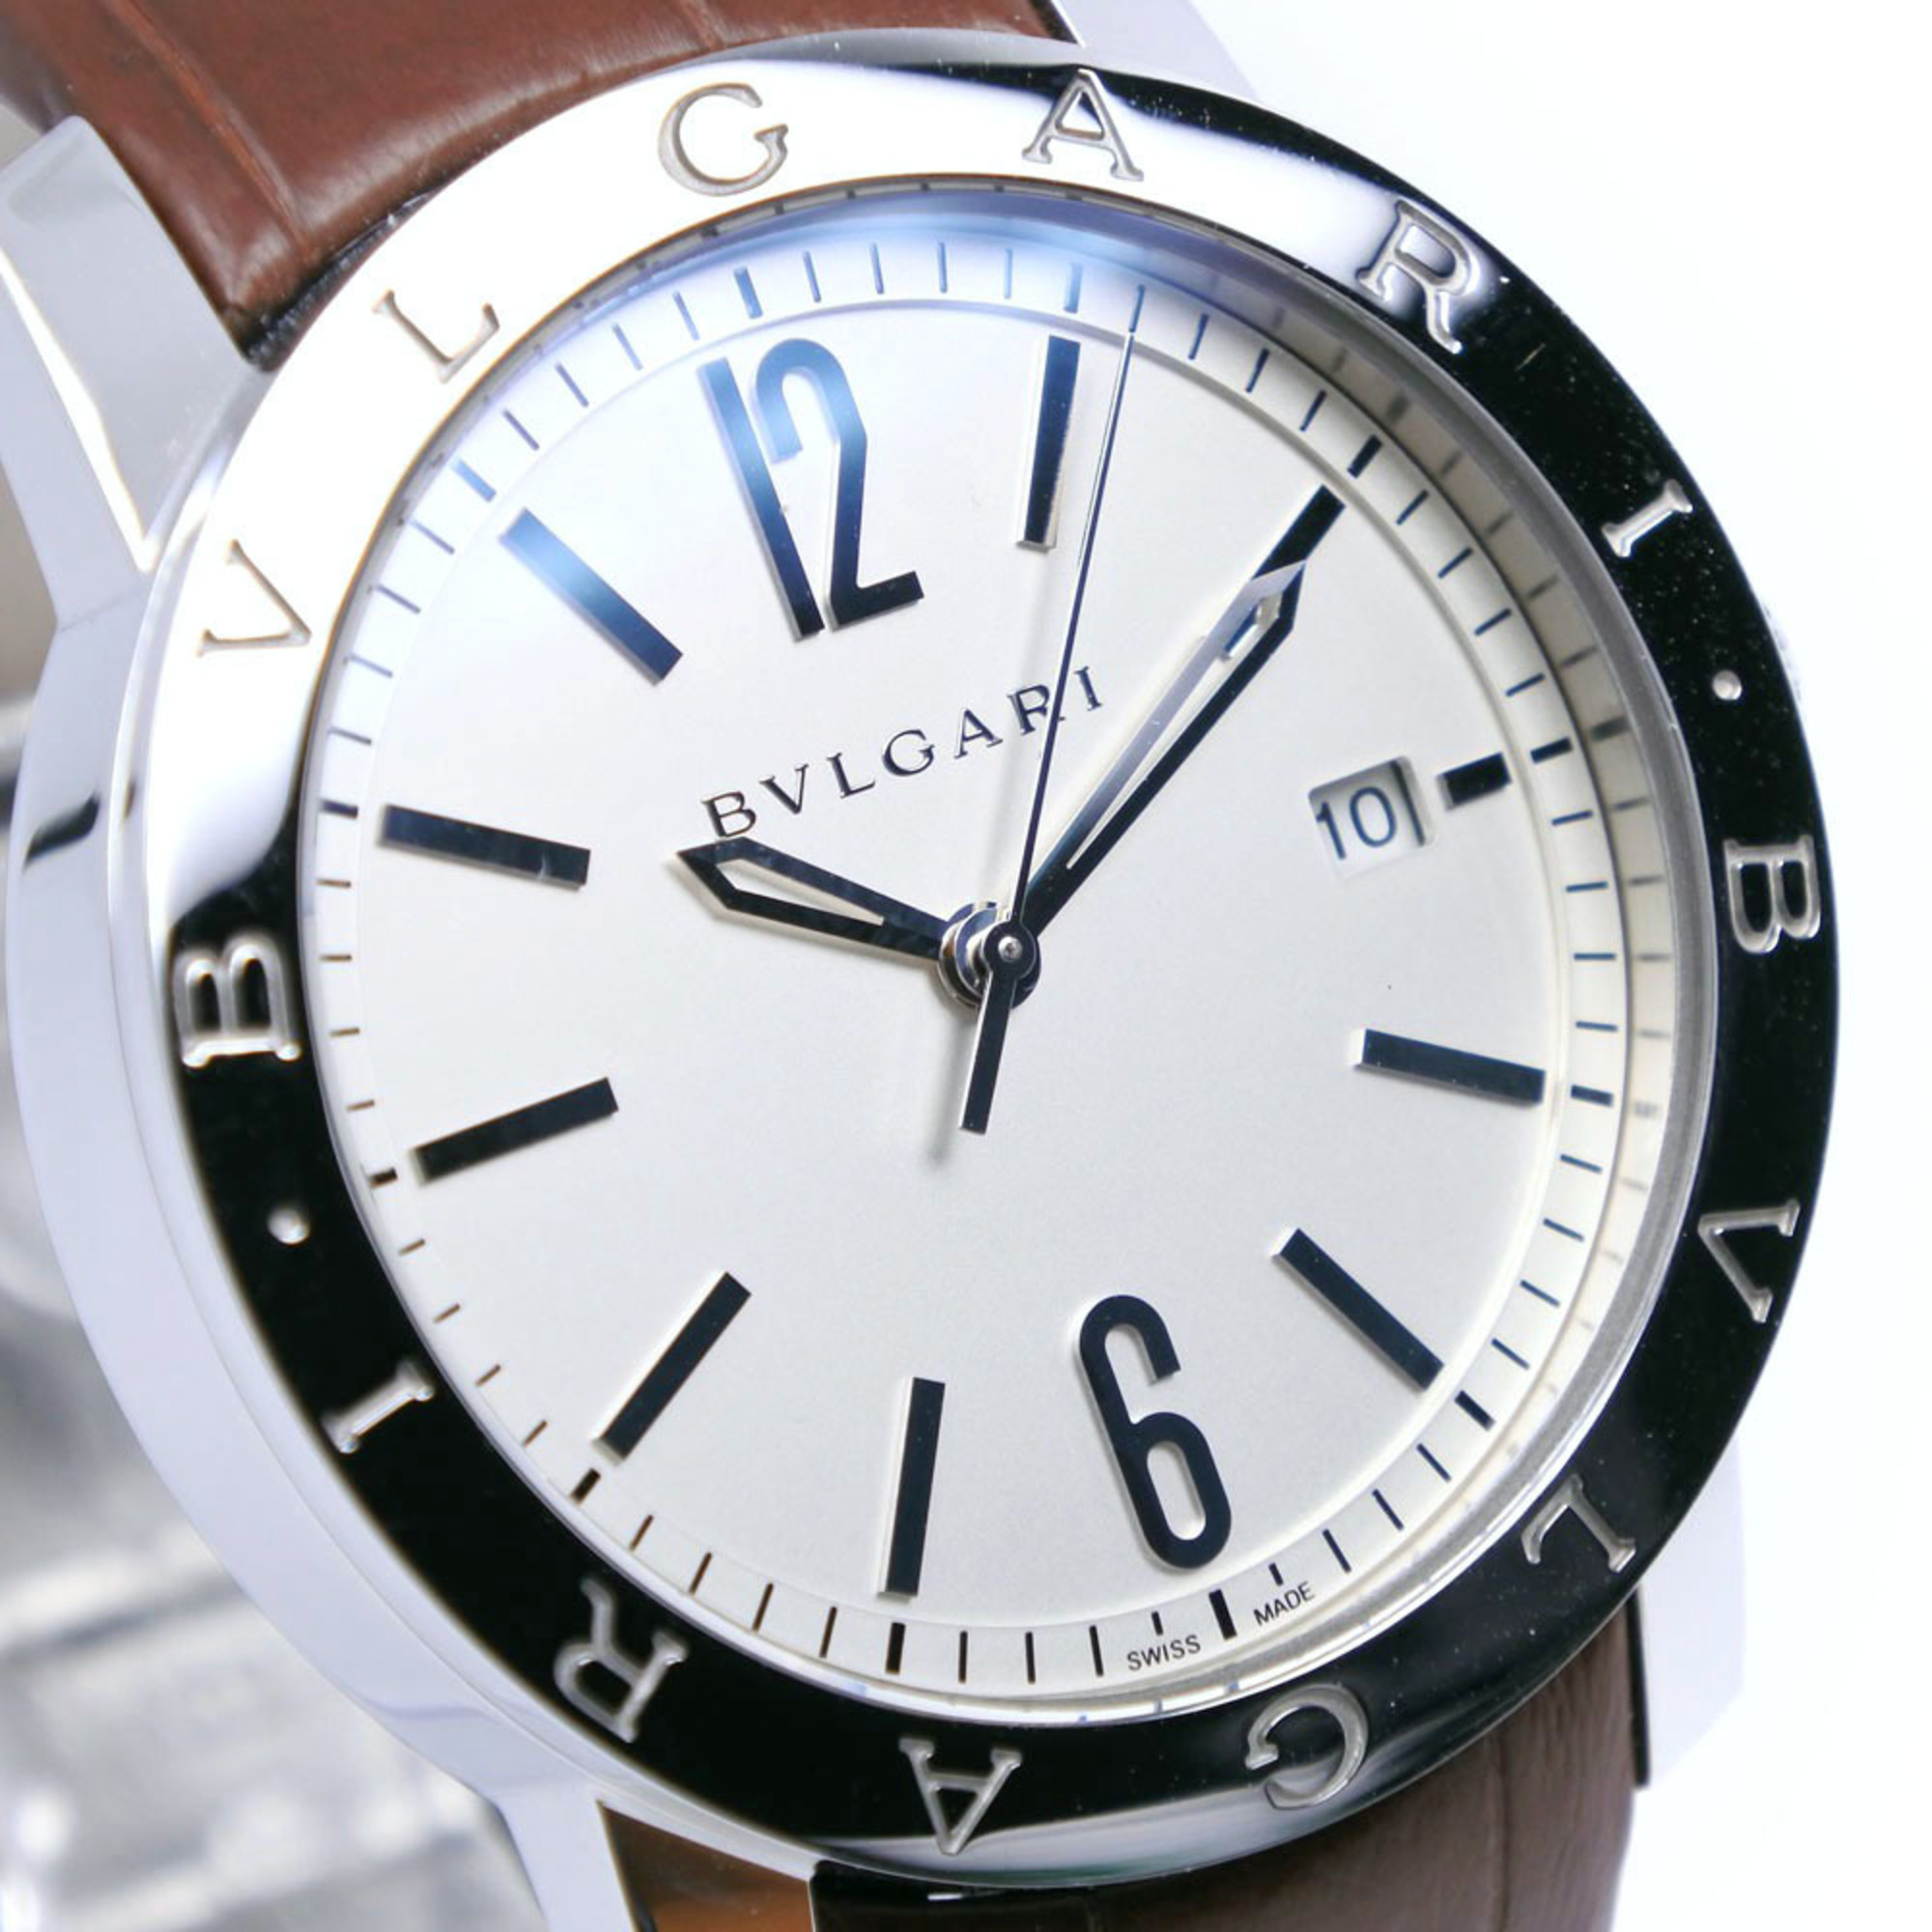 Bvlgari BB39WSLD Stainless Steel x Leather Silver Automatic Winding Men's Dial Watch